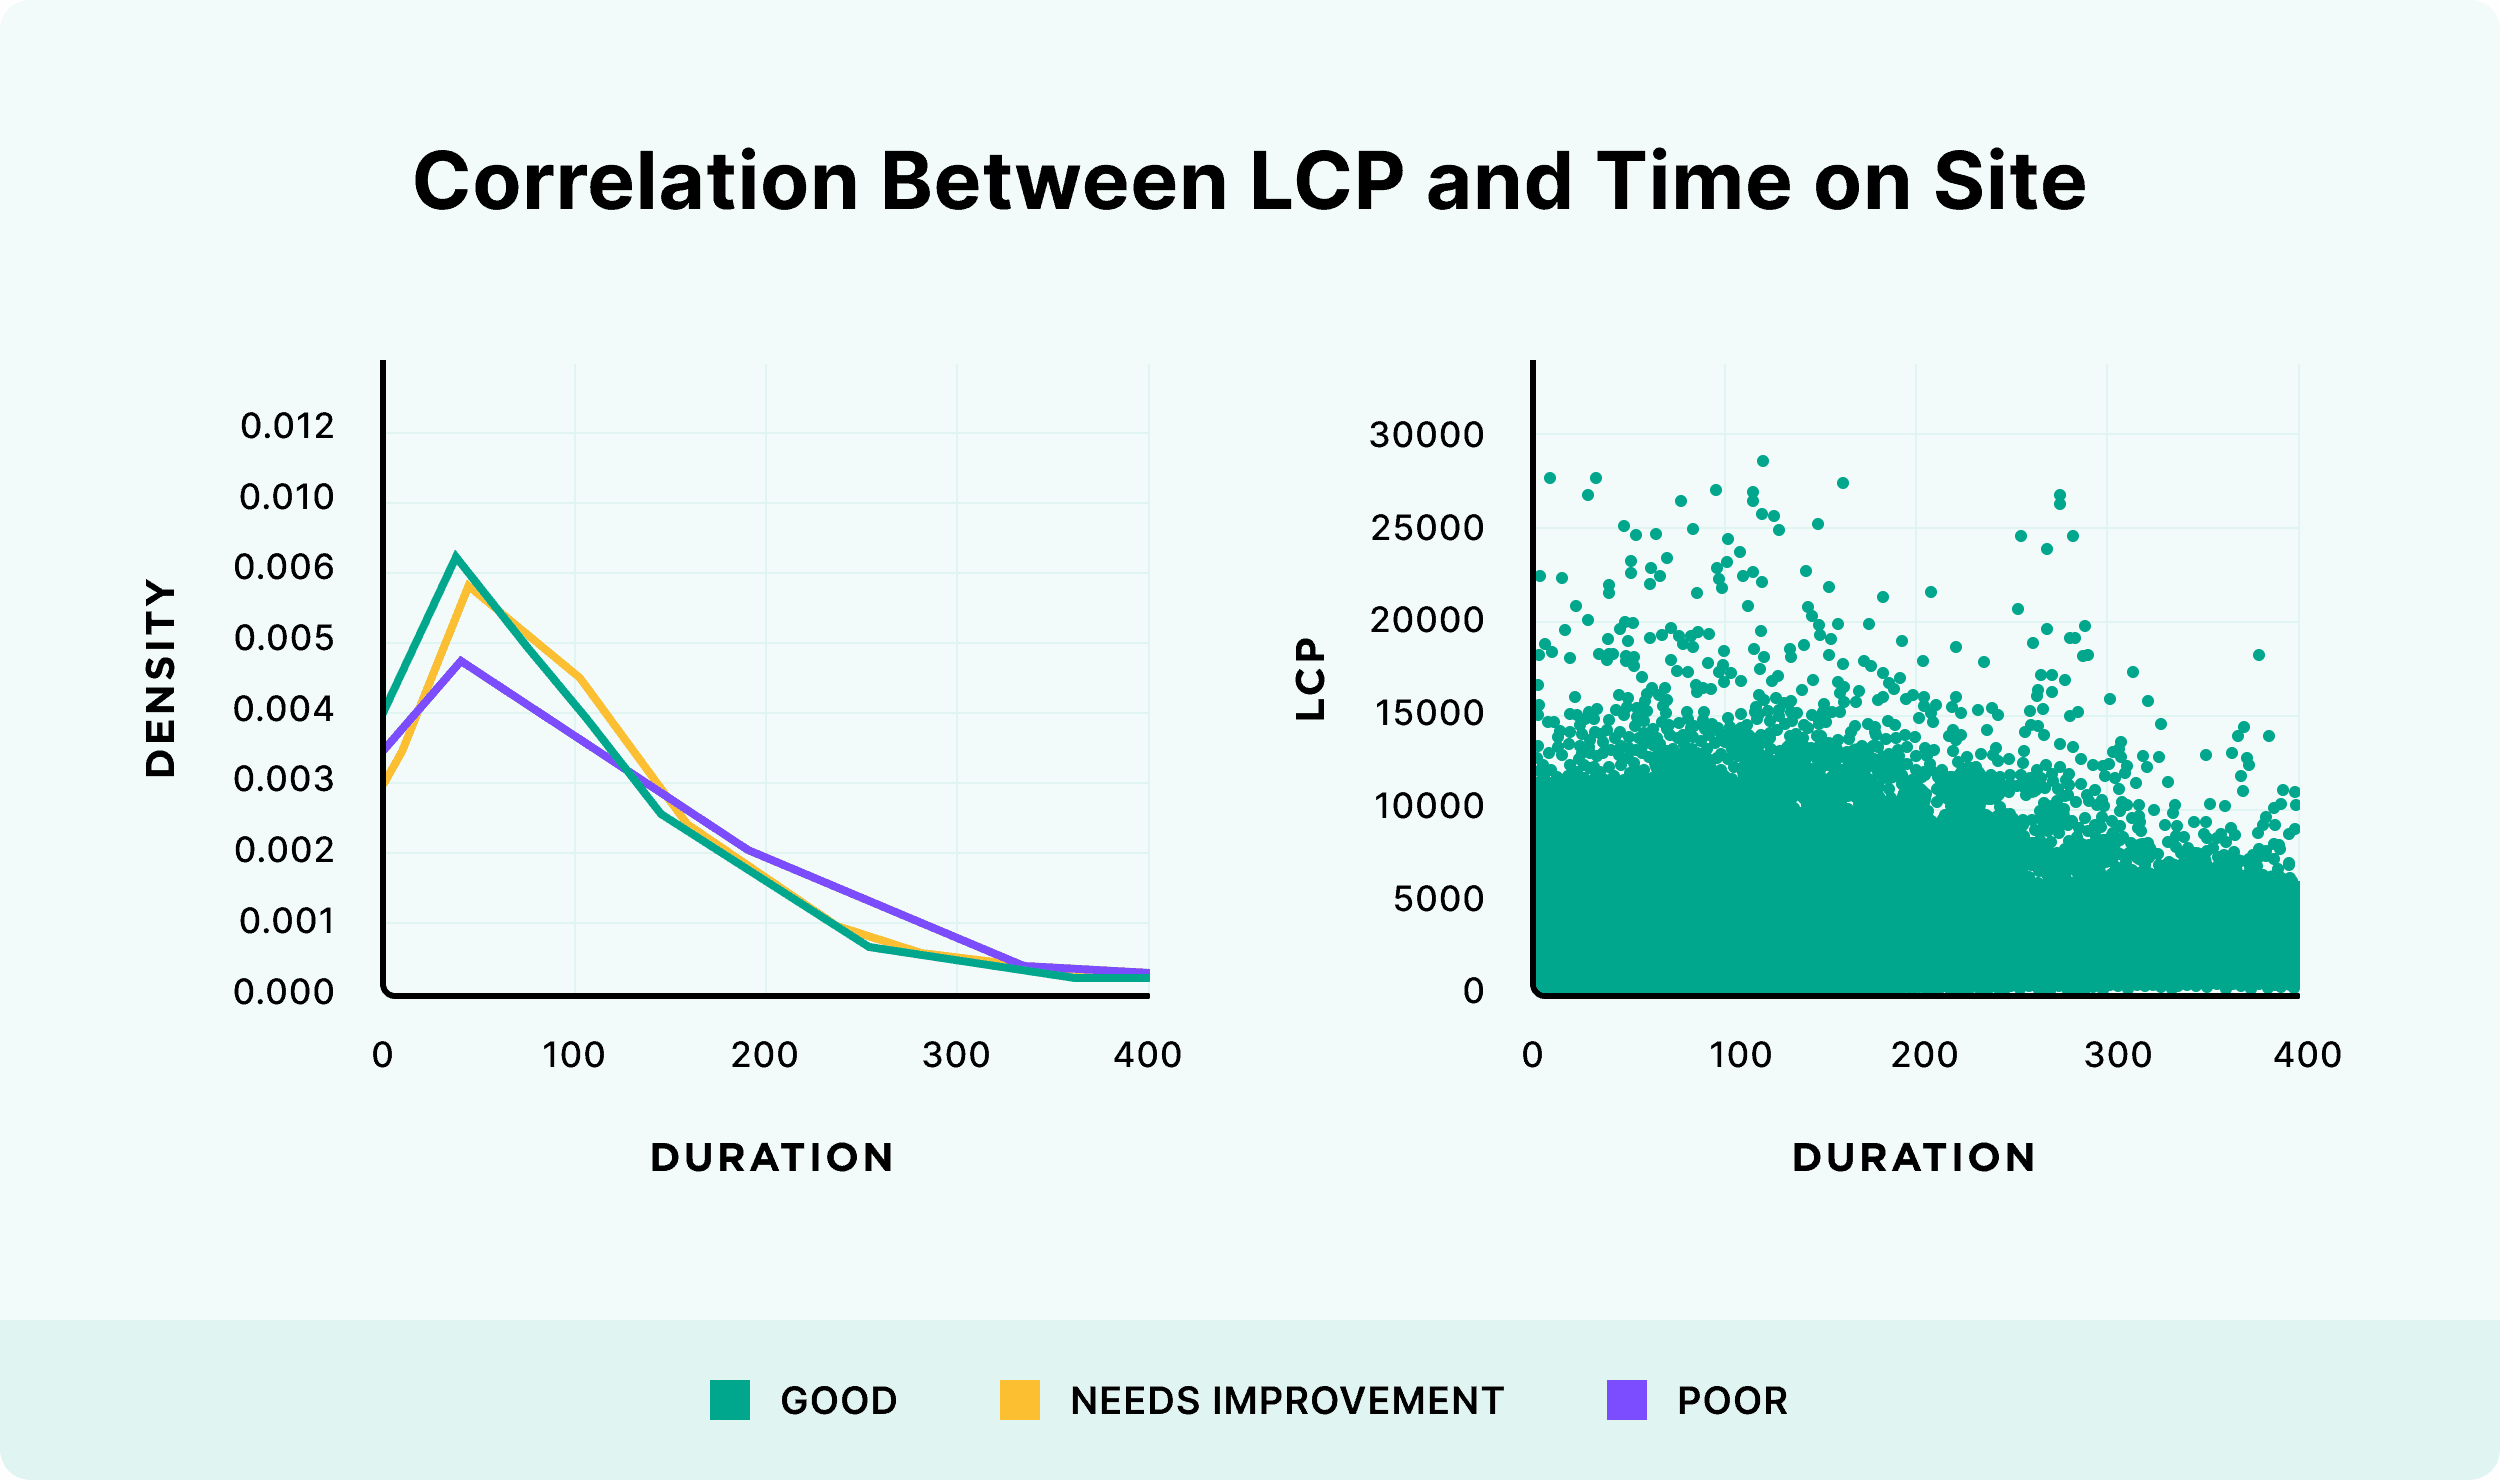 Correlation between LCP and time on site